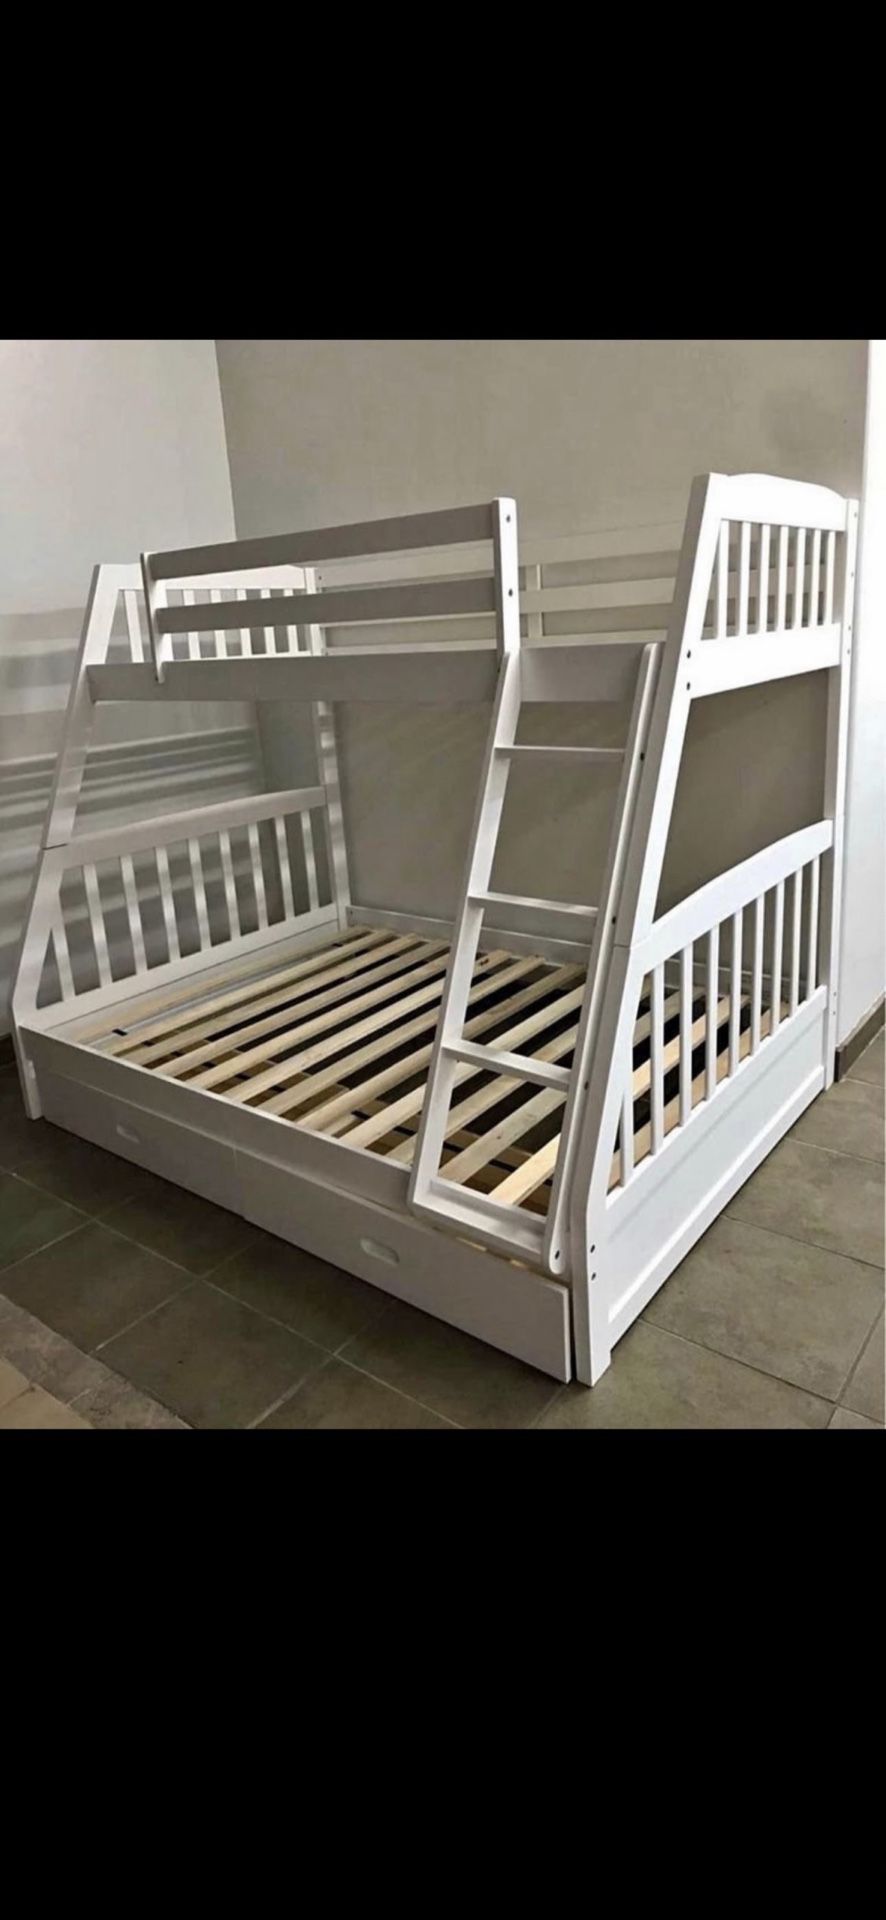 New Twin/Full Bunk bed 